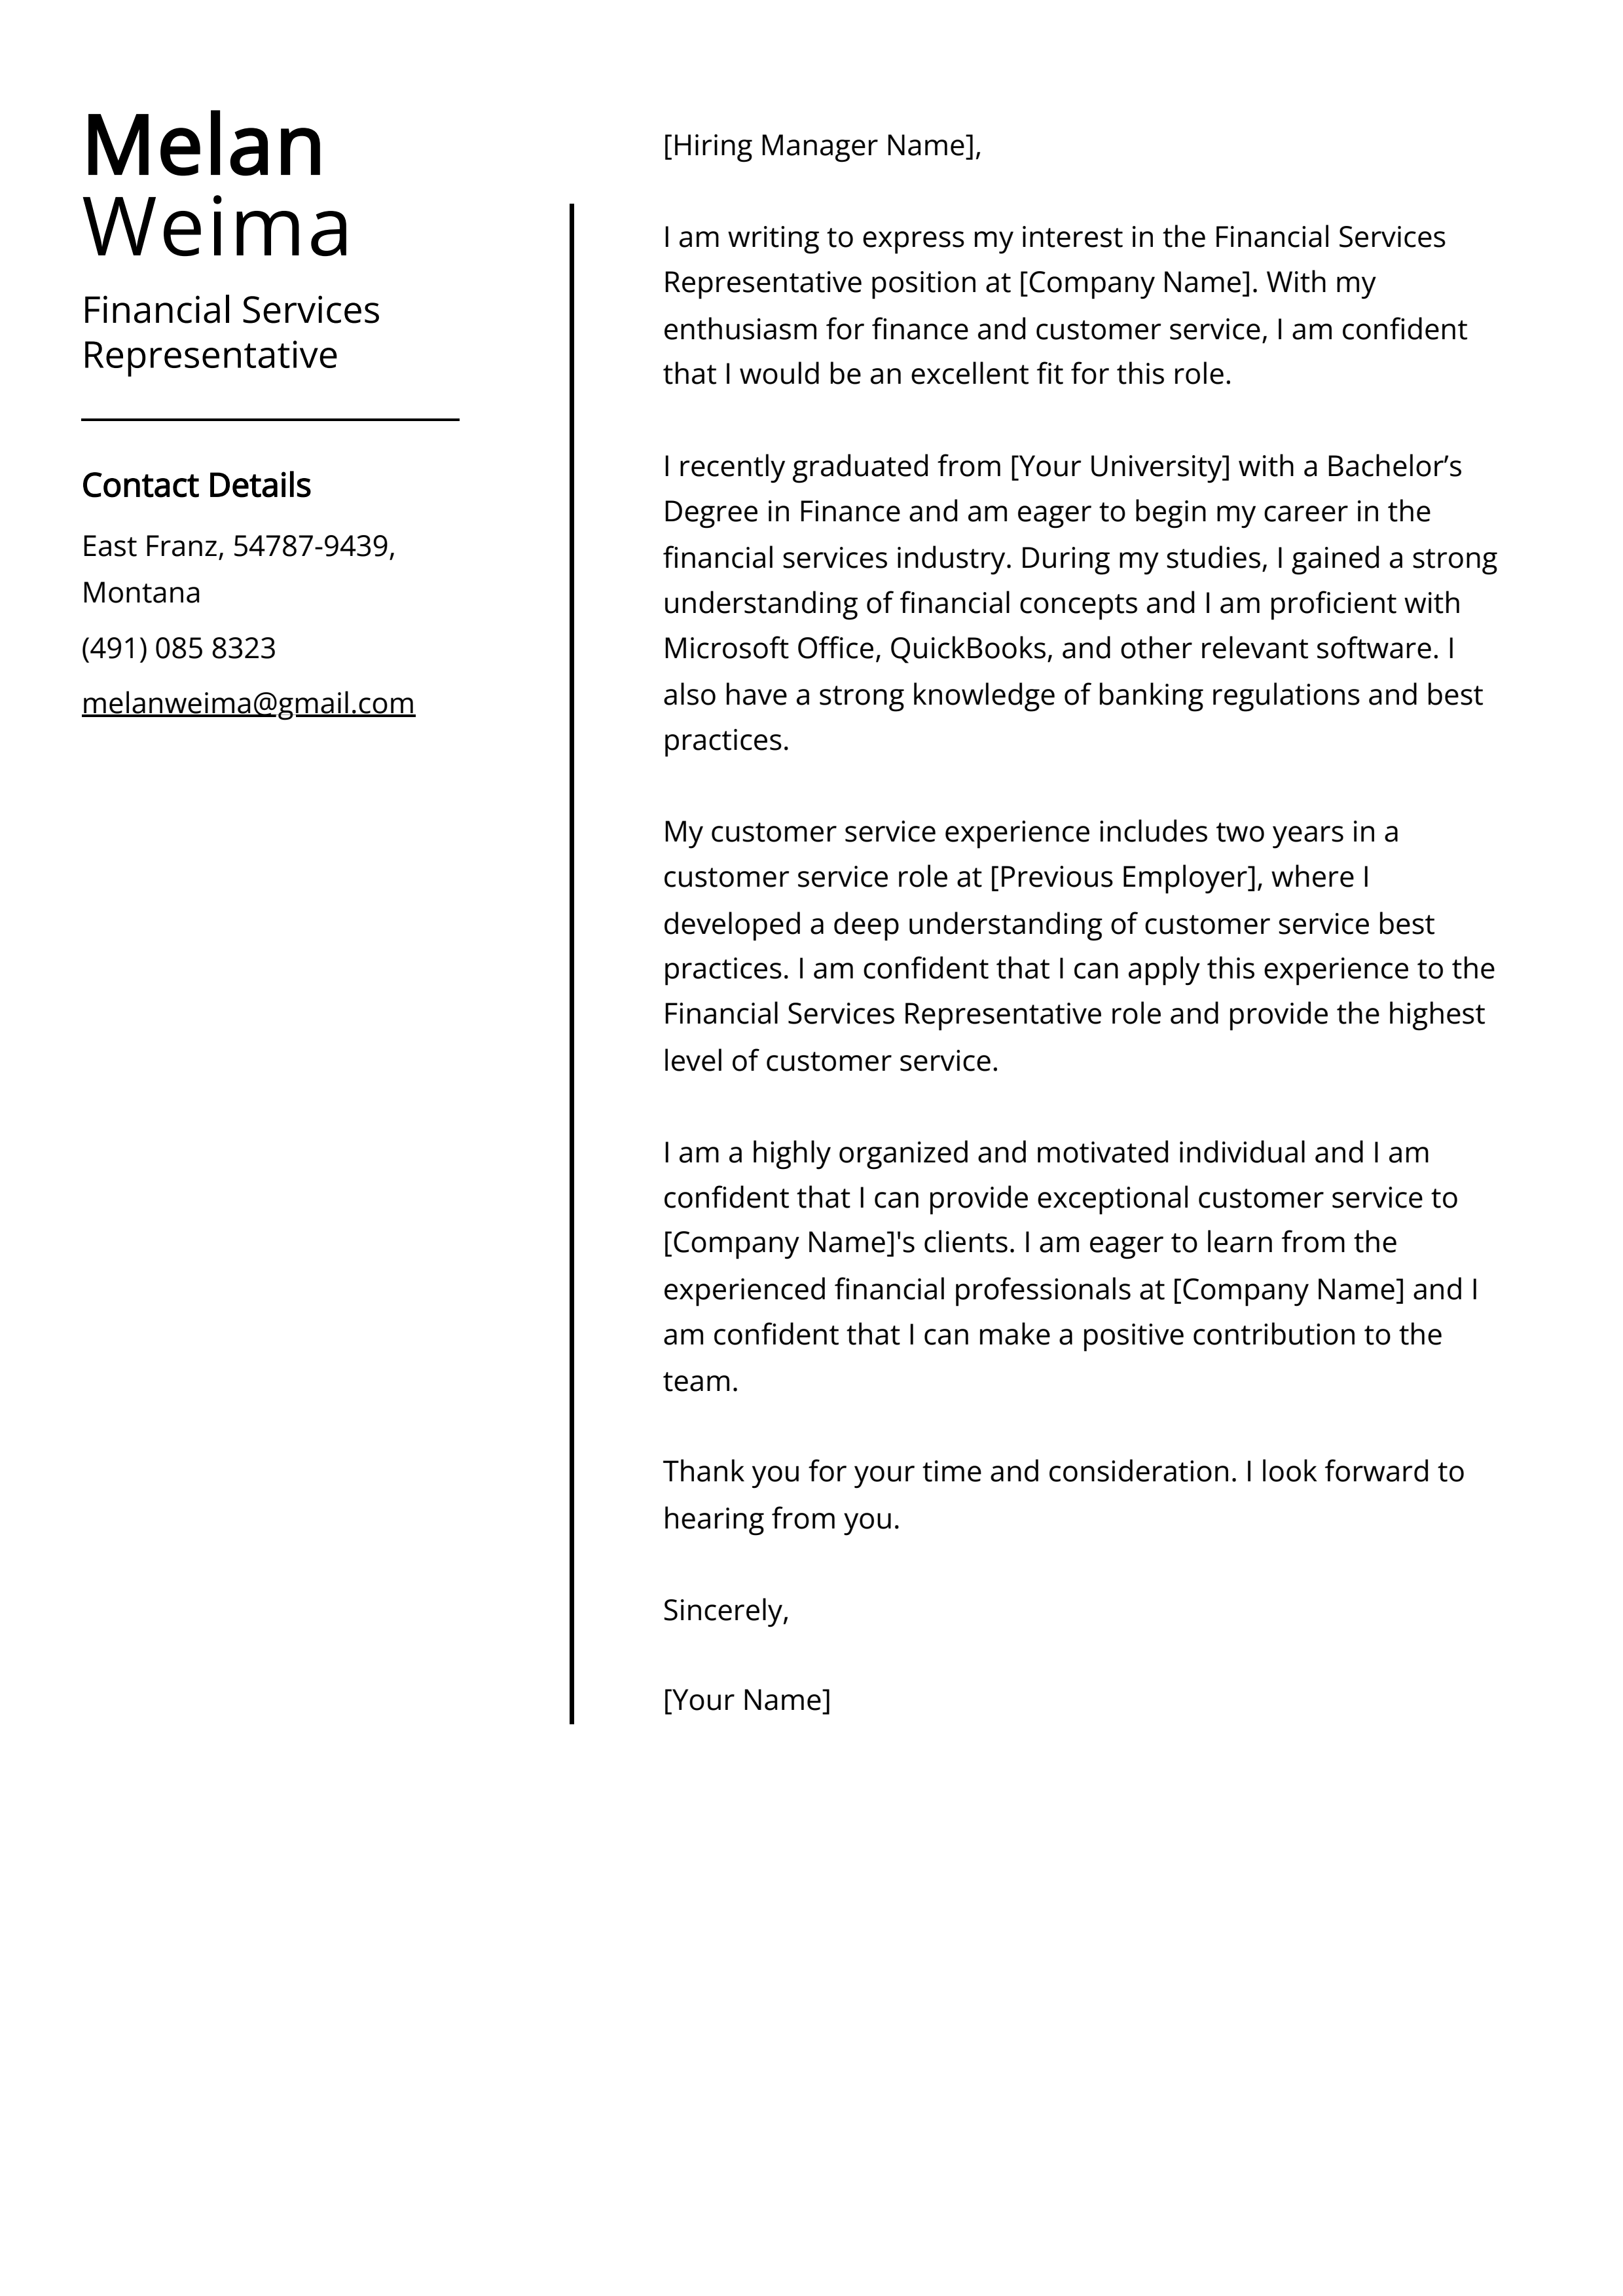 Financial Services Representative Cover Letter Example